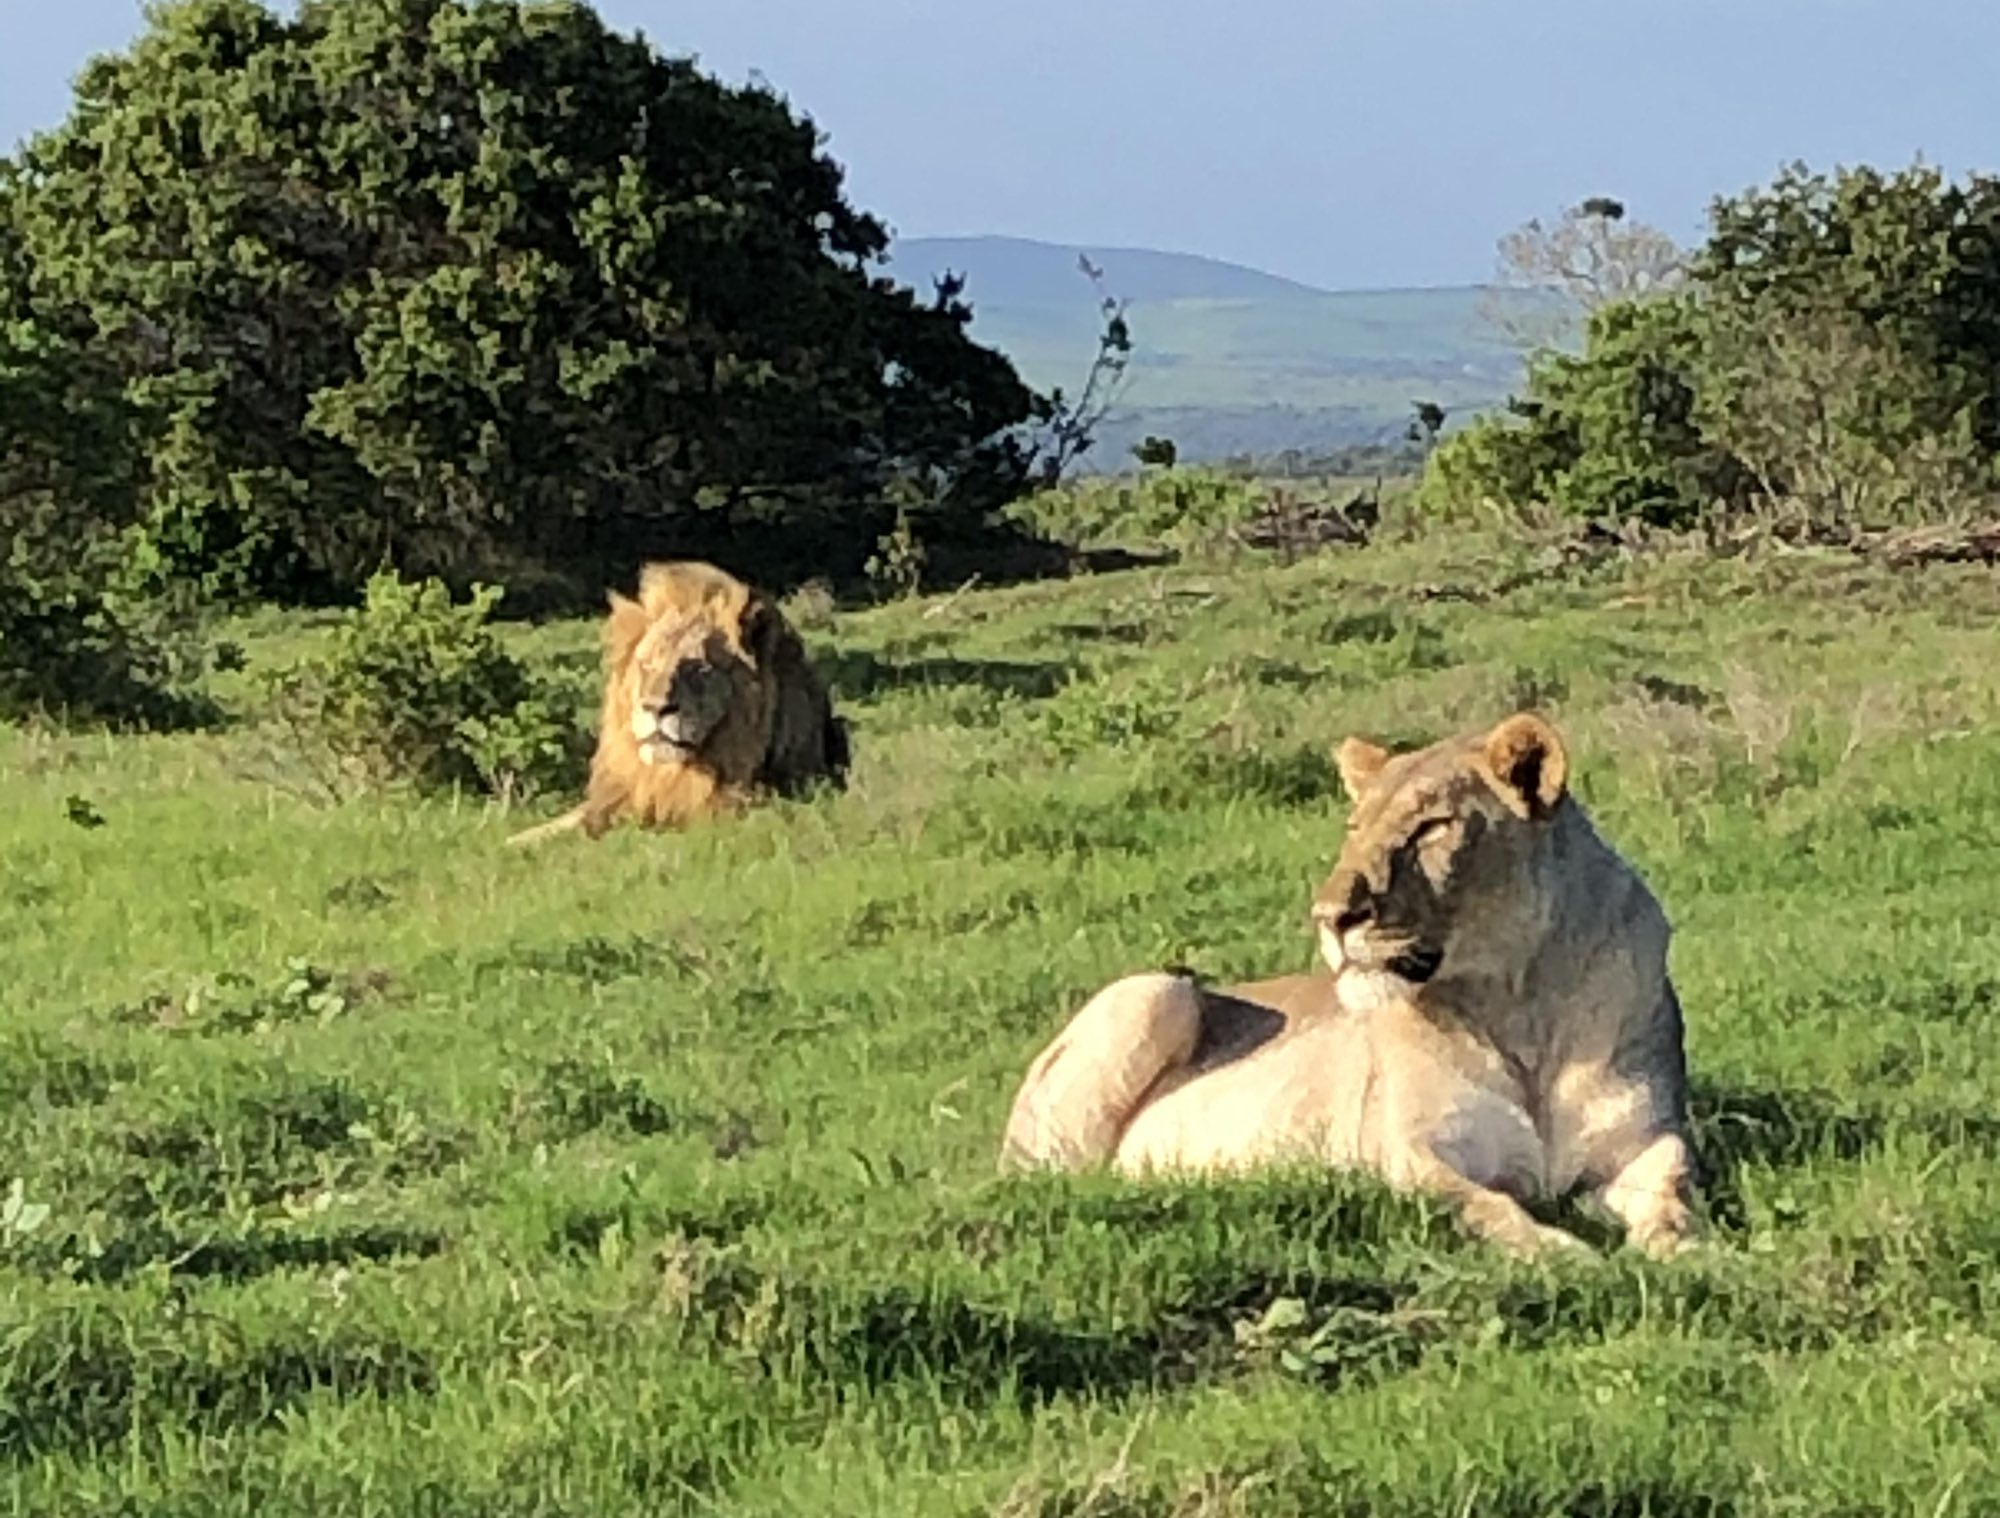 USA Guest Shares African Lion Safari Experience